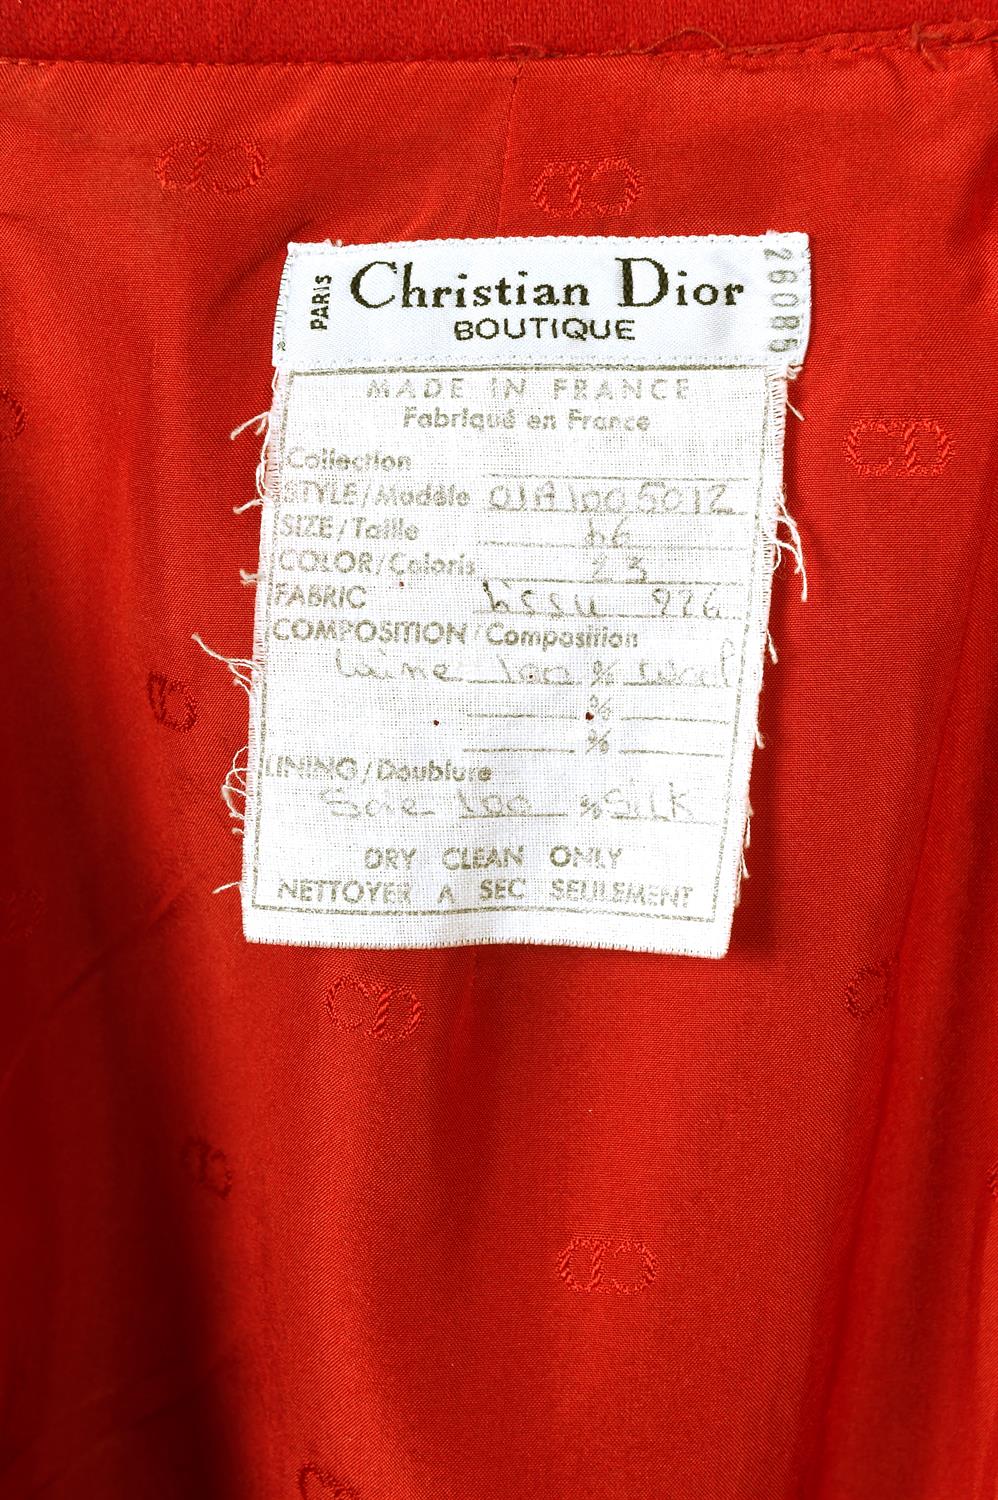 CHRSTIAN DIOR Two wool skirts- One red 1980s pencil skirt and one black 1990s skirt with pleats. - Image 9 of 9